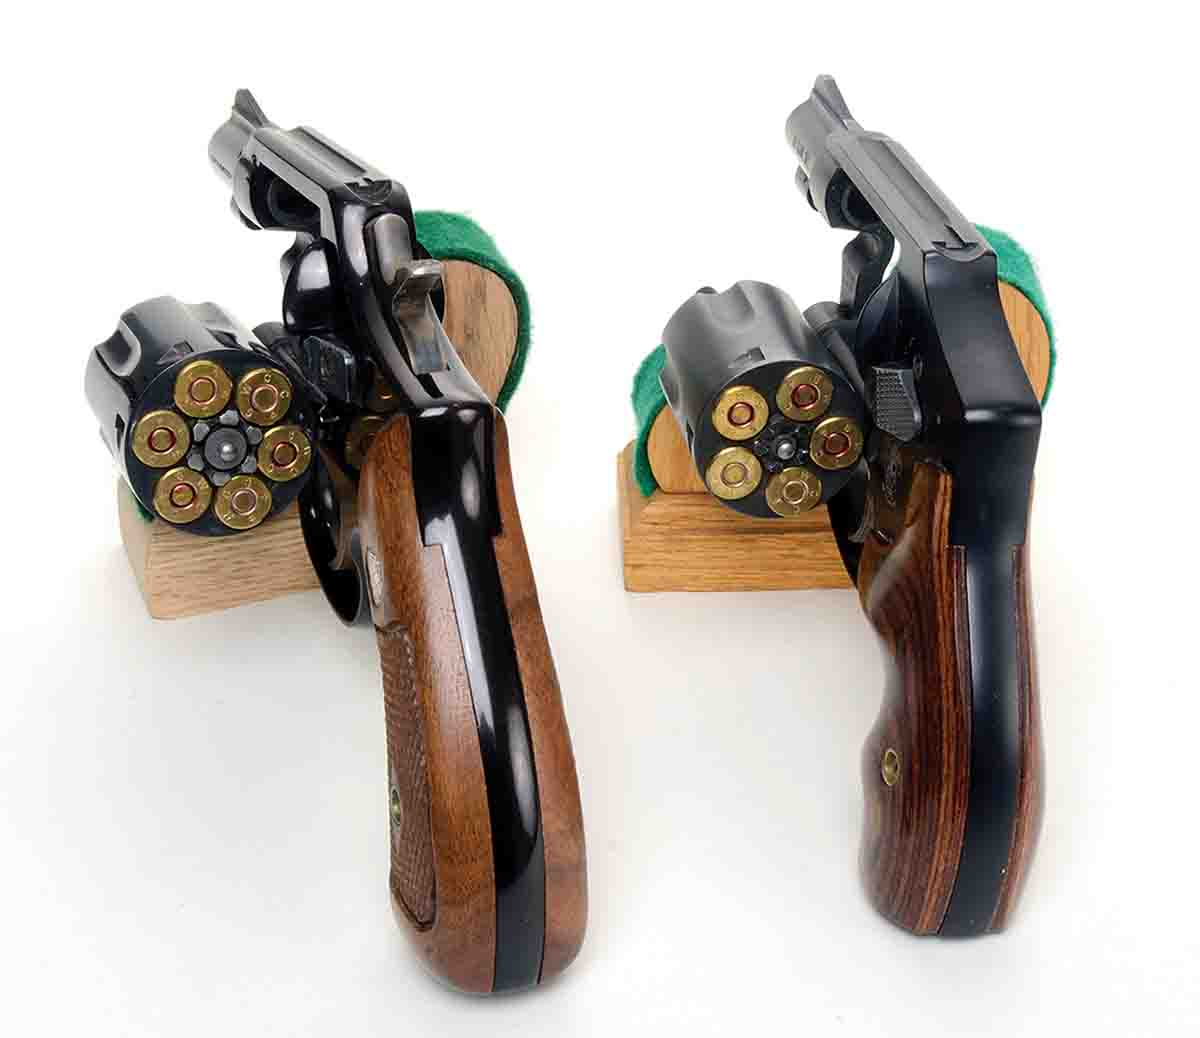 Of seven snub-nose .38 Specials on hand, five are six-shooters such as the Smith & Wesson Model 12 at left, and two are five-shooters like the Smith & Wesson Model 442 at right.